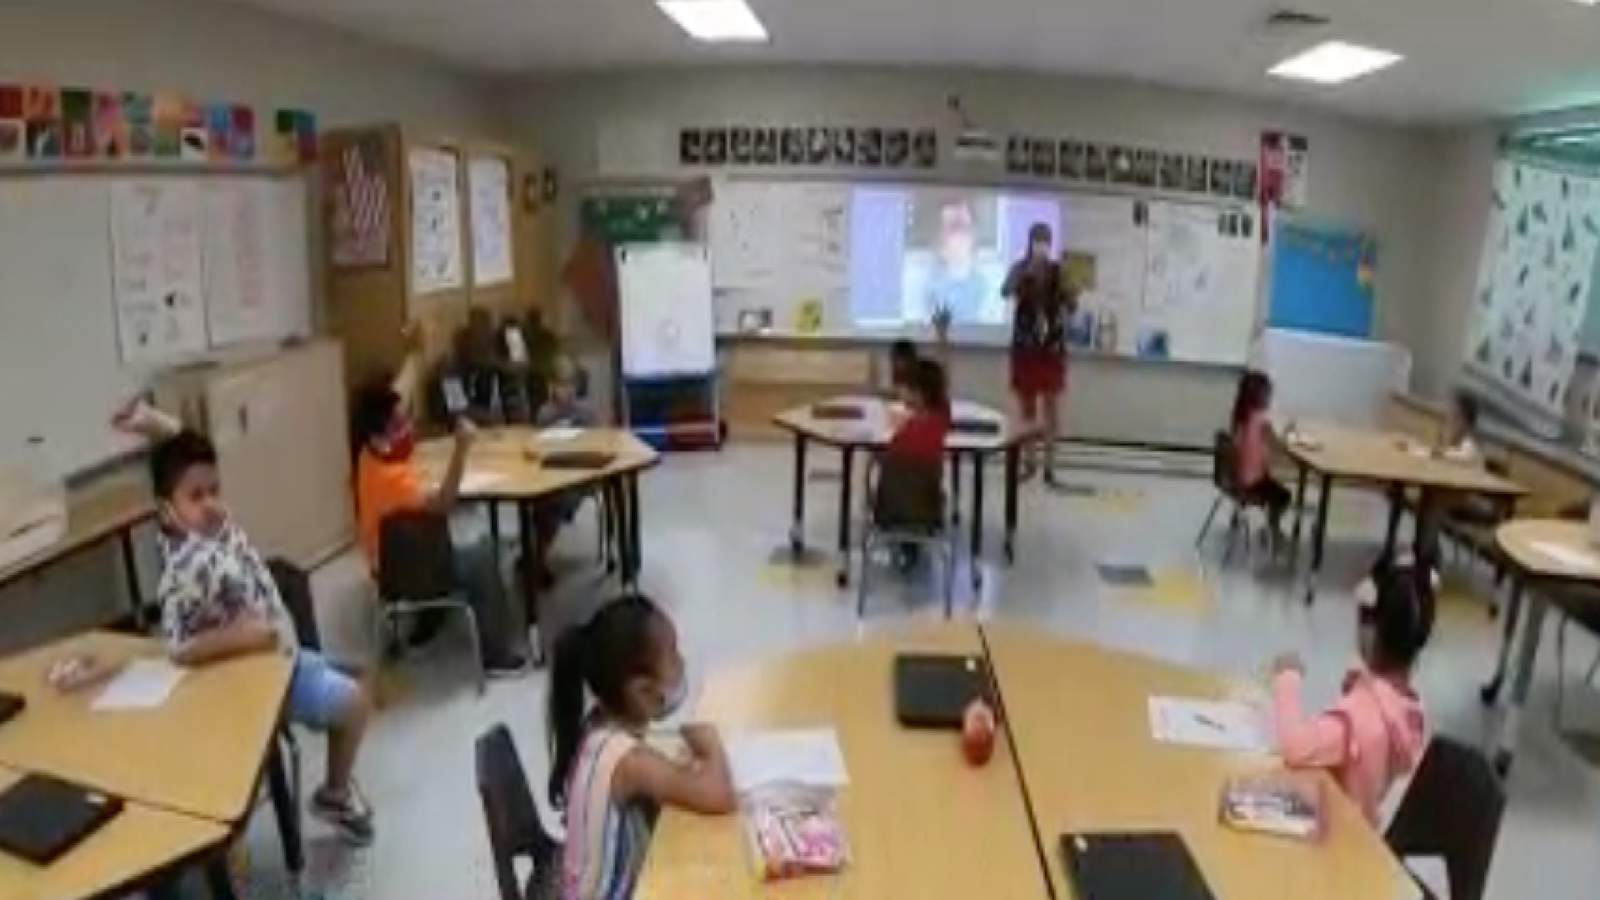 This Houston-area school district shows preview of what school reopening could look like